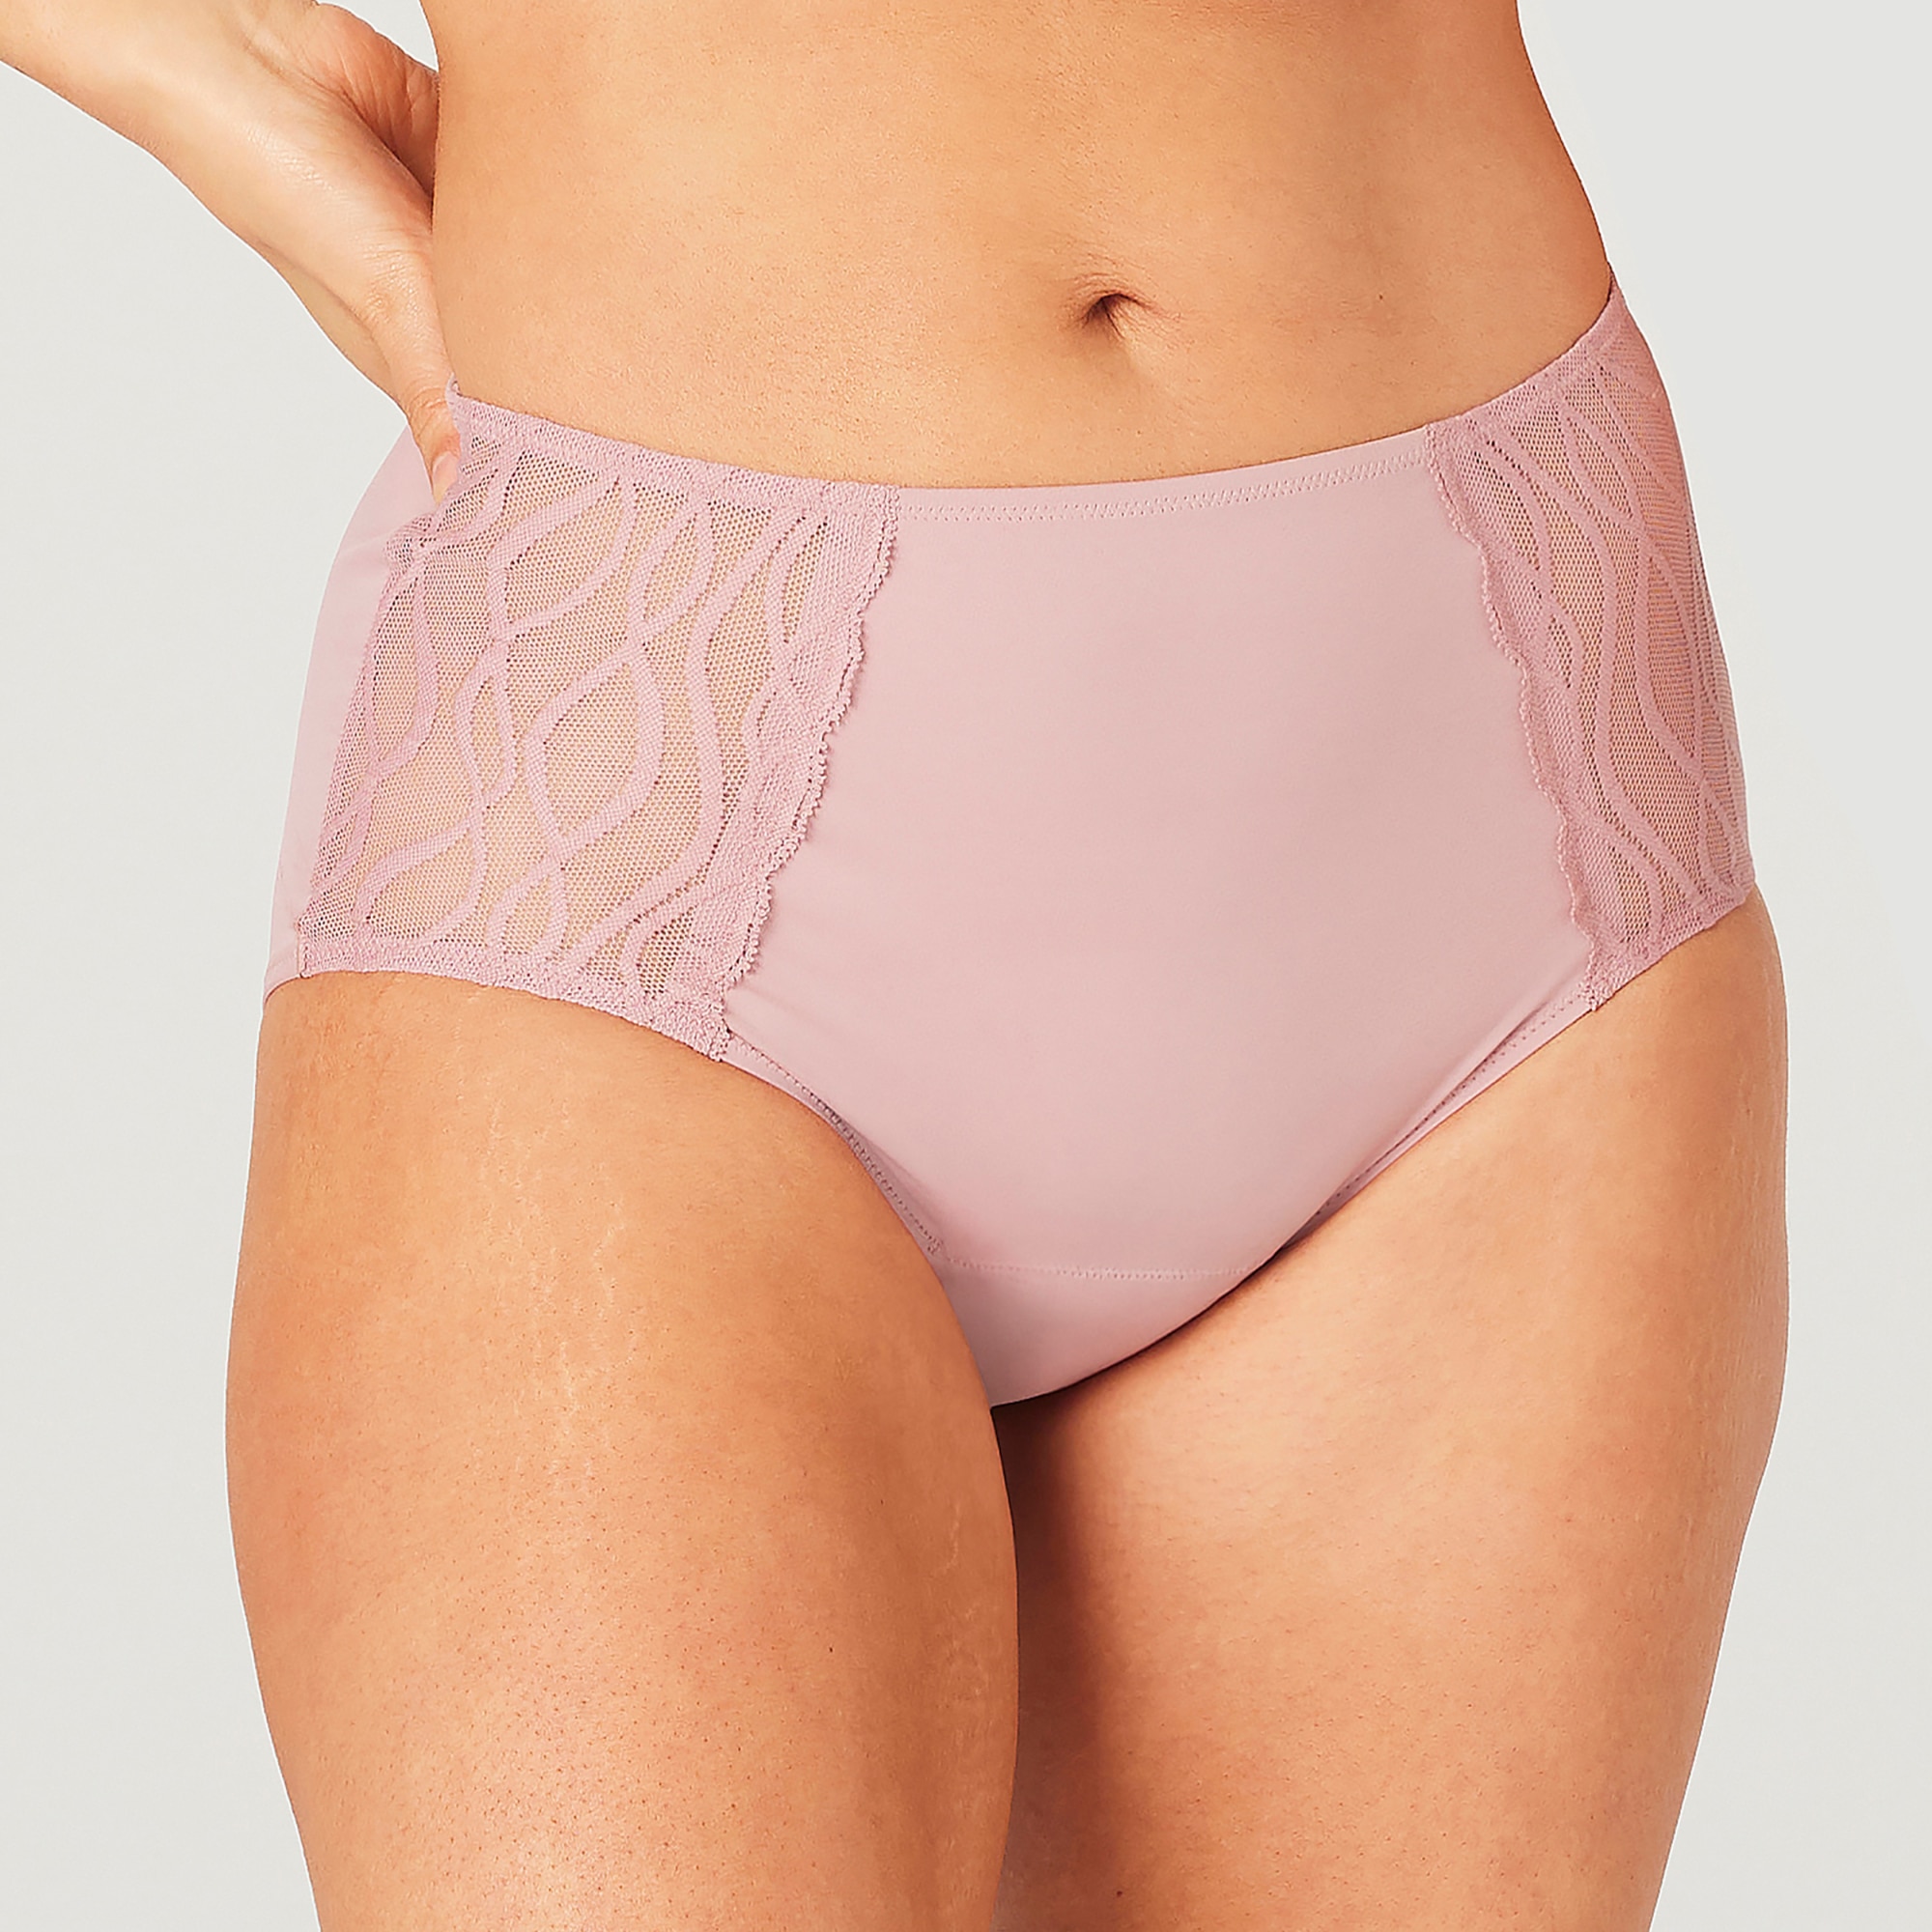 Discover TENA Silhouette Washable incontinence underwear – Vintage